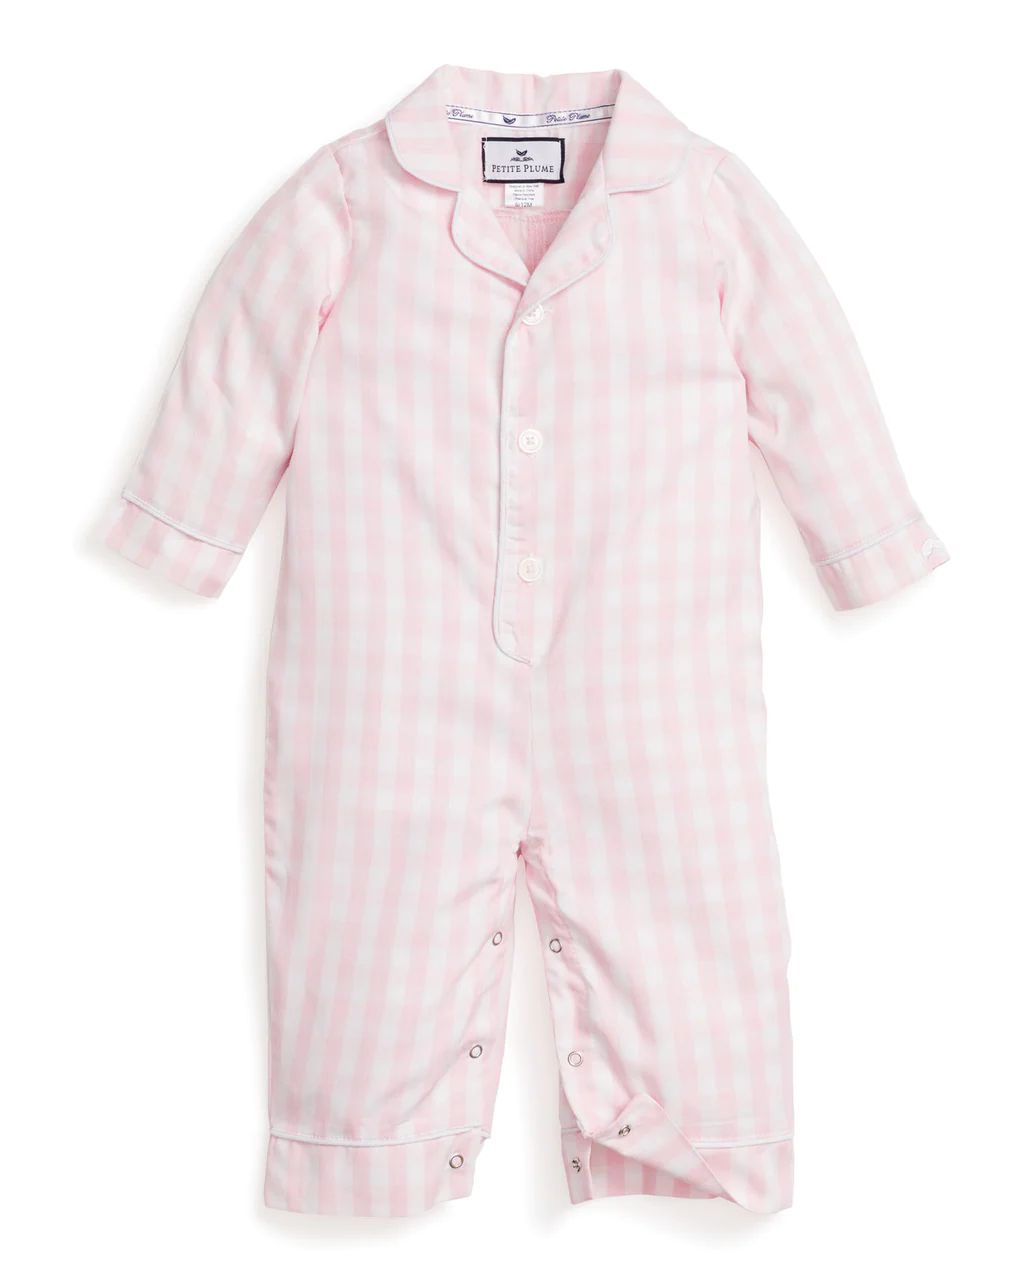 Baby's Twill Romper in Pink Gingham | Petite Plume